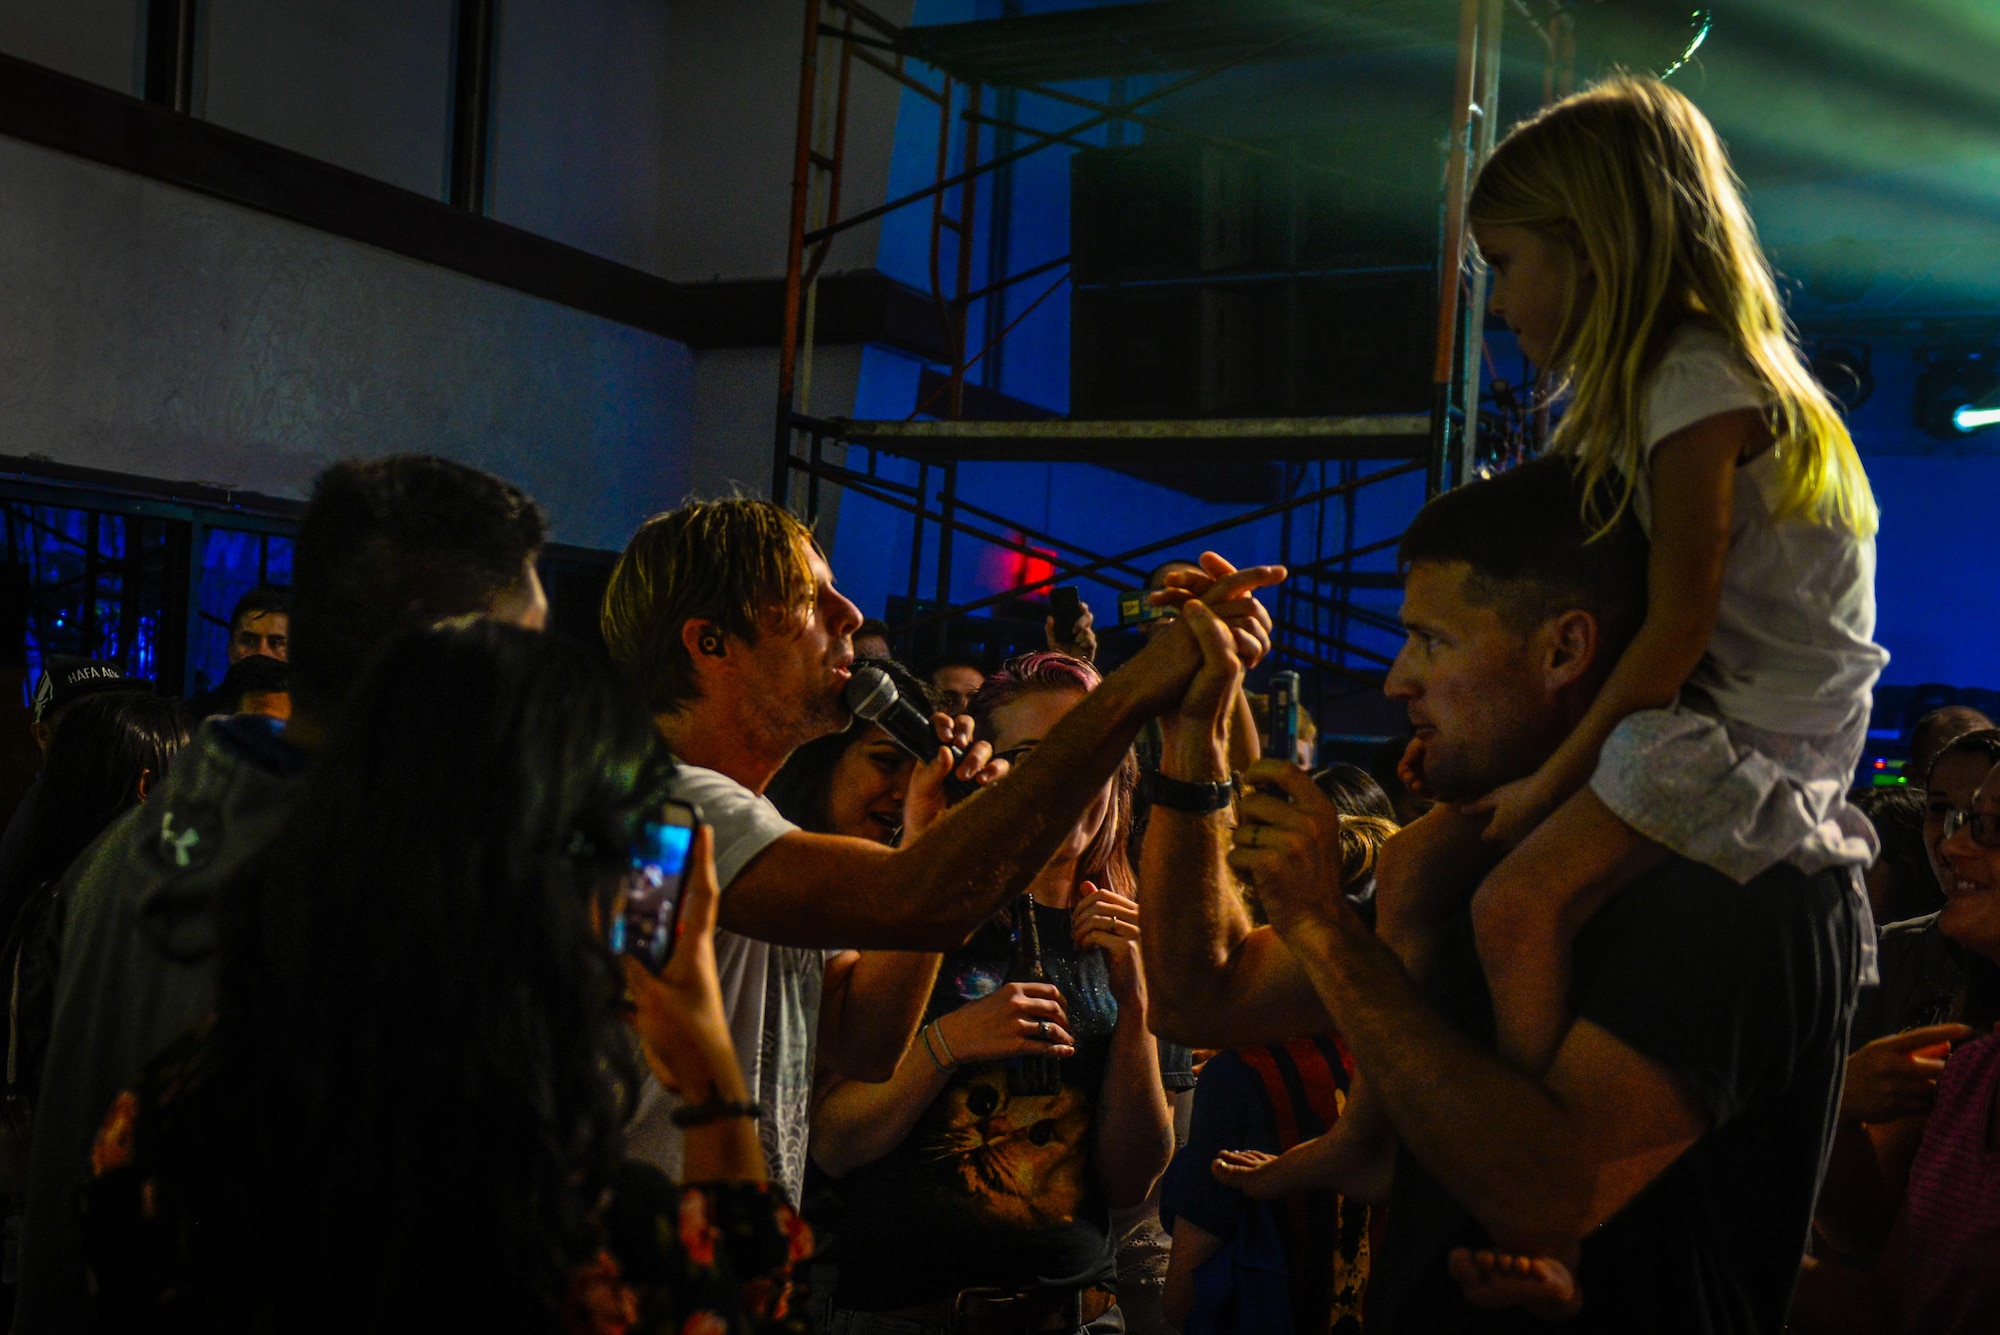 Switchfoot frontman Jon Foreman high-fives audience members during a song Nov. 21, 2015, at Andersen Air Force Base, Guam. The Grammy Award-winning band visited the island to perform tribute concerts to service members and families. (U.S. Air Force photo by Staff Sgt. Alexander W. Riedel/Released)